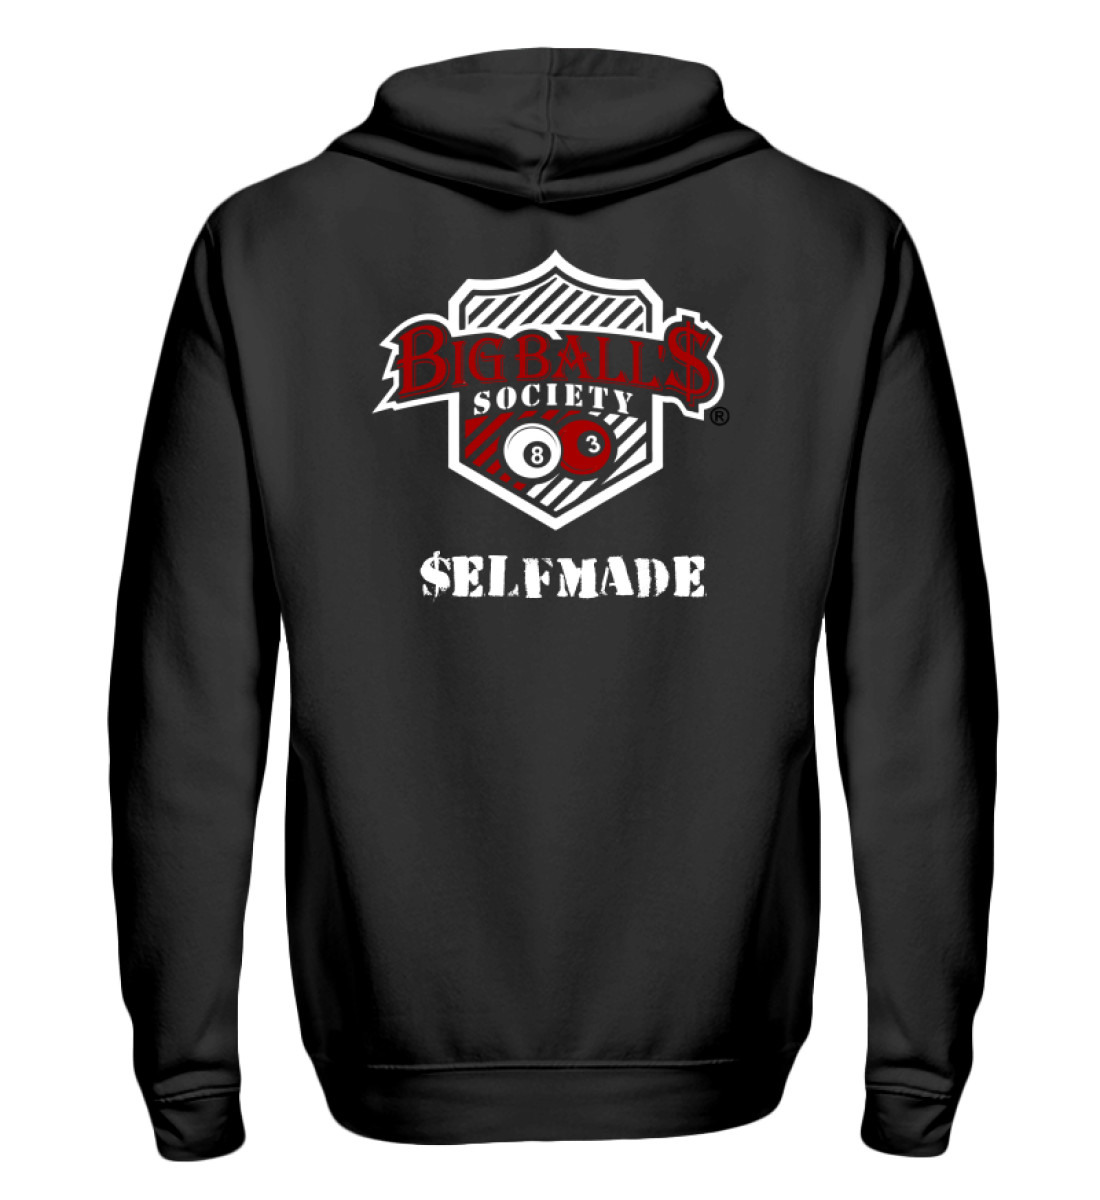 $elfmade White/ Red by Big Ball'$ Society  - Zip-Hoodie